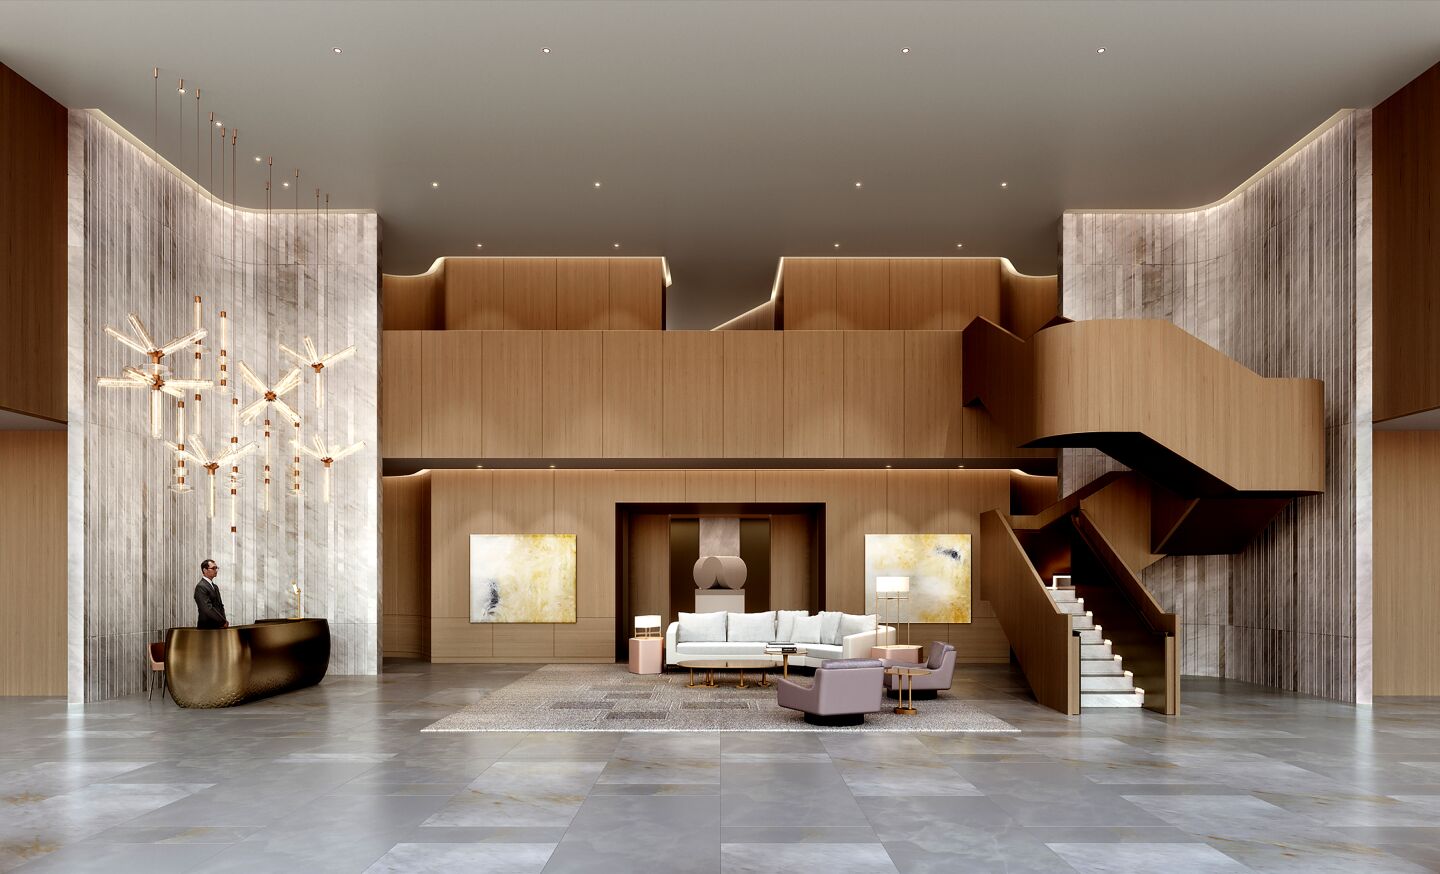 Artist rendering The marble lobby of one of the condo towers.